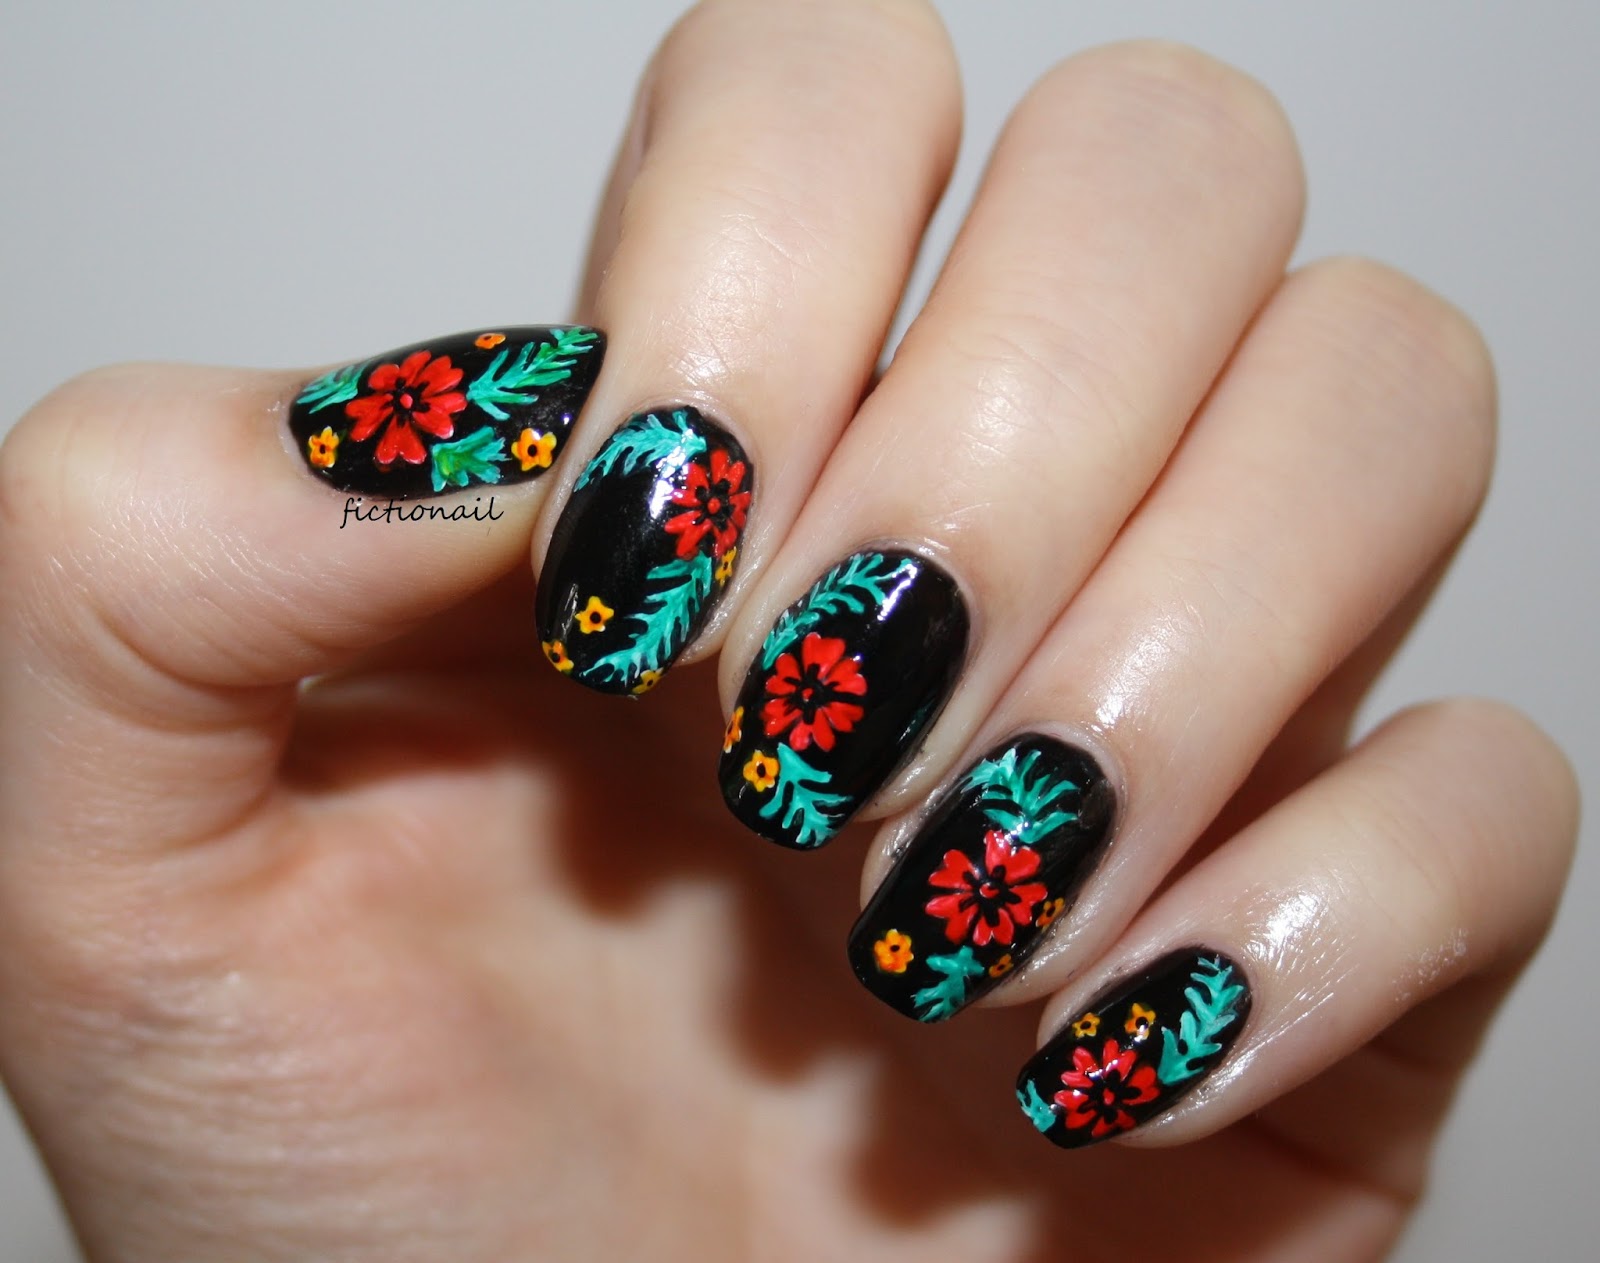 8. Flower nail design for long nails - wide 10